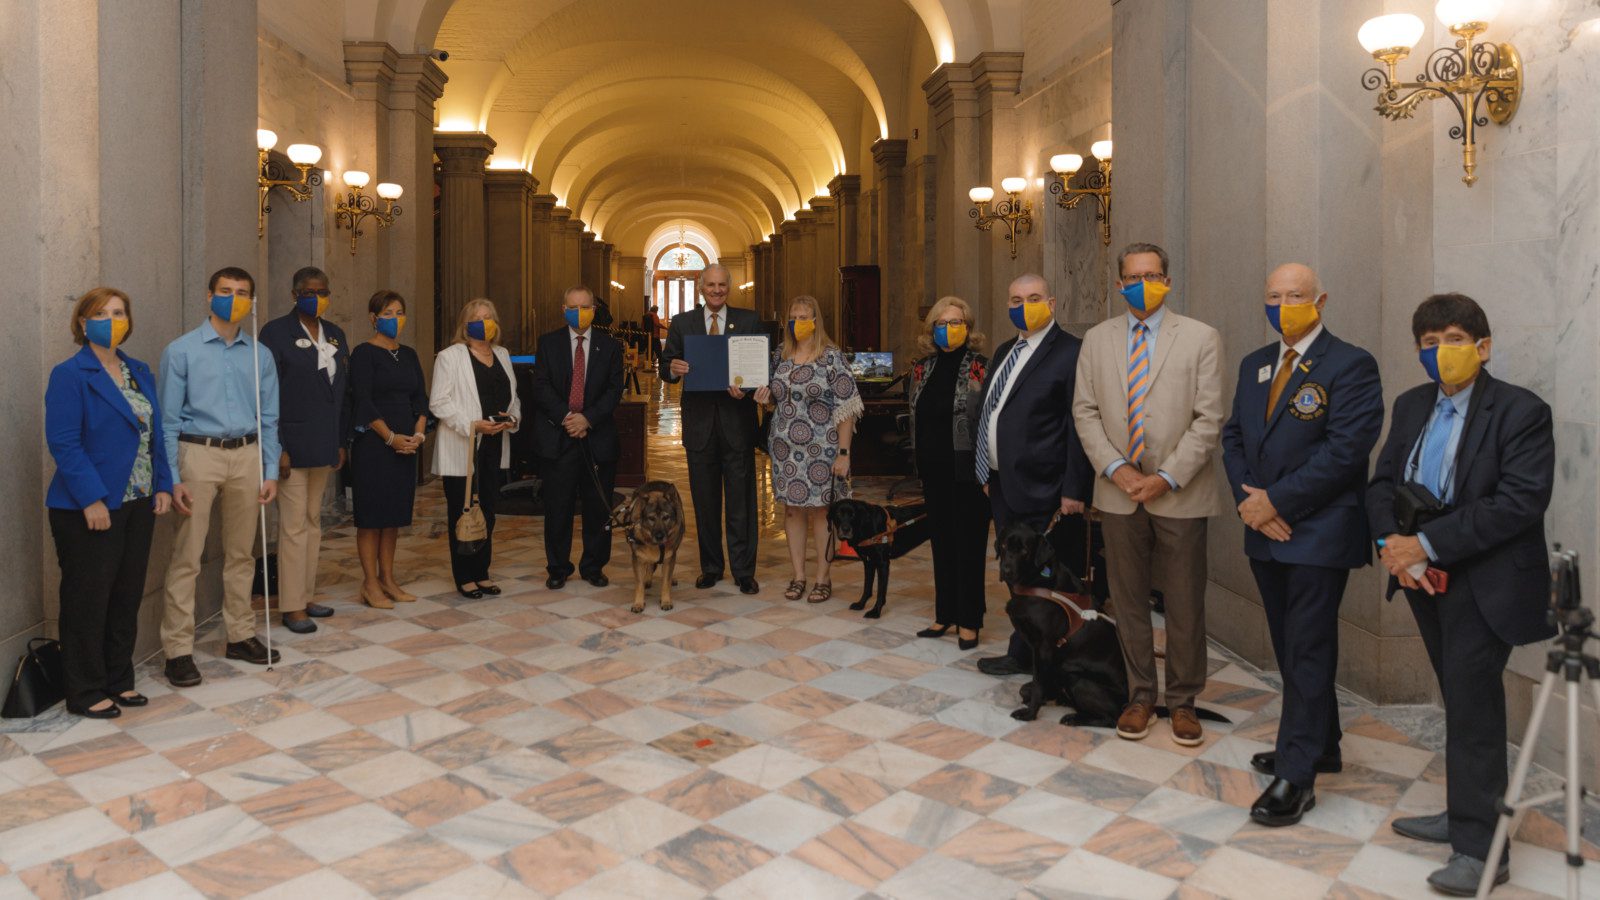 Billy Irwin, his guide dog Verner and Steve Fullerton joined Governor McMaster and leaders of South Carolina’s blind community on October 21 to honor White Cane Day.